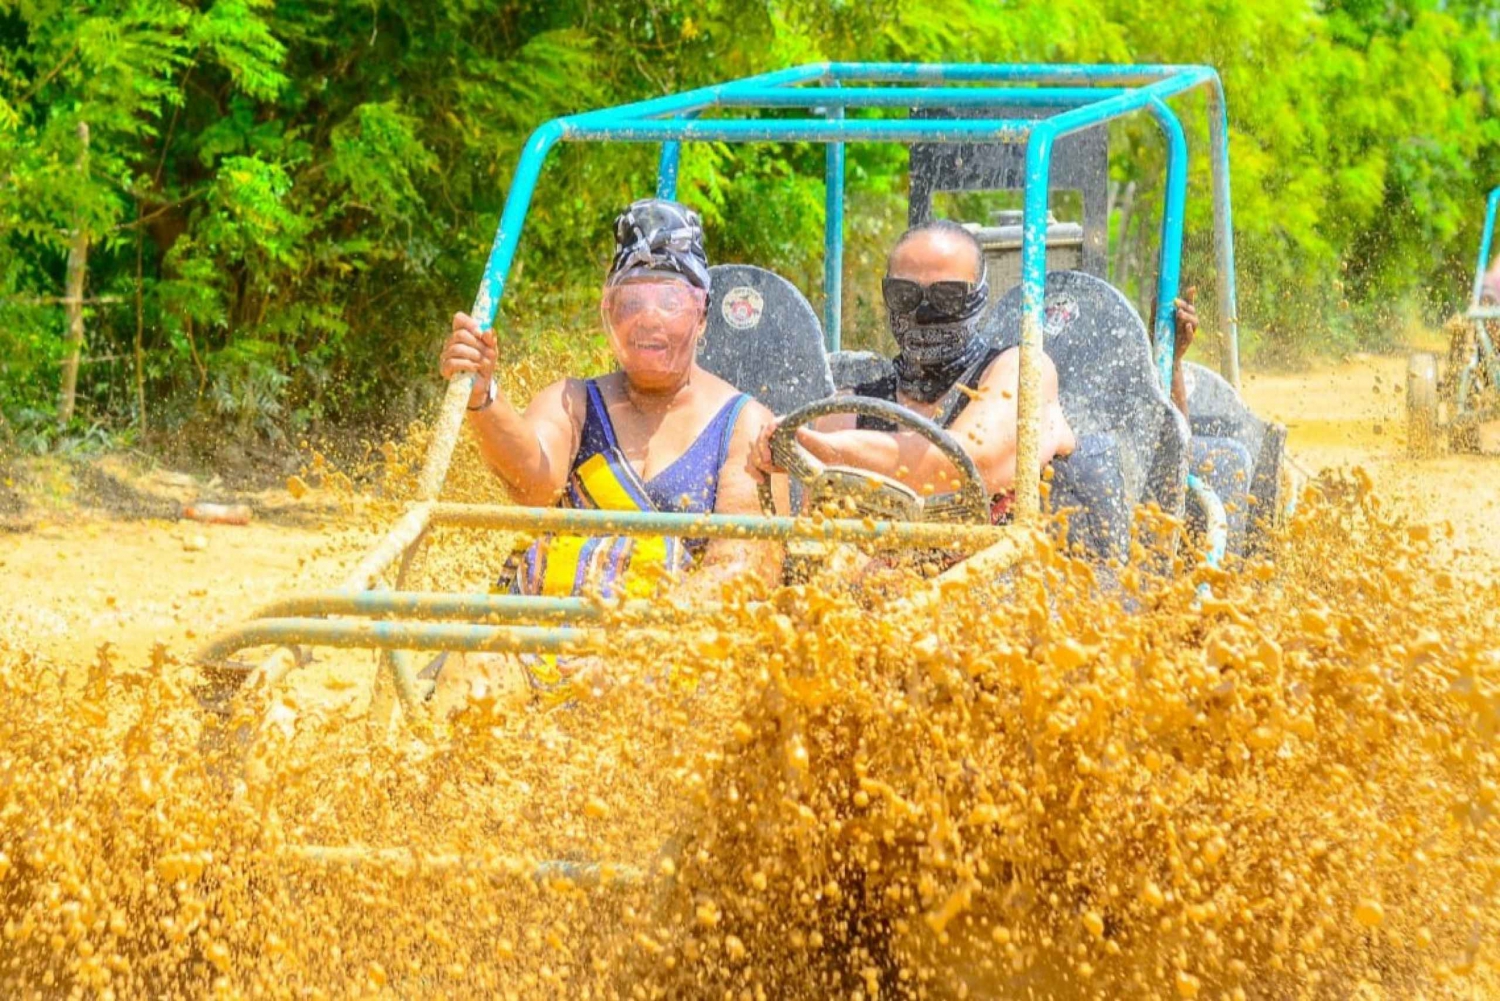 Punta Cana Adventure Buggy Double With transportation Cenote